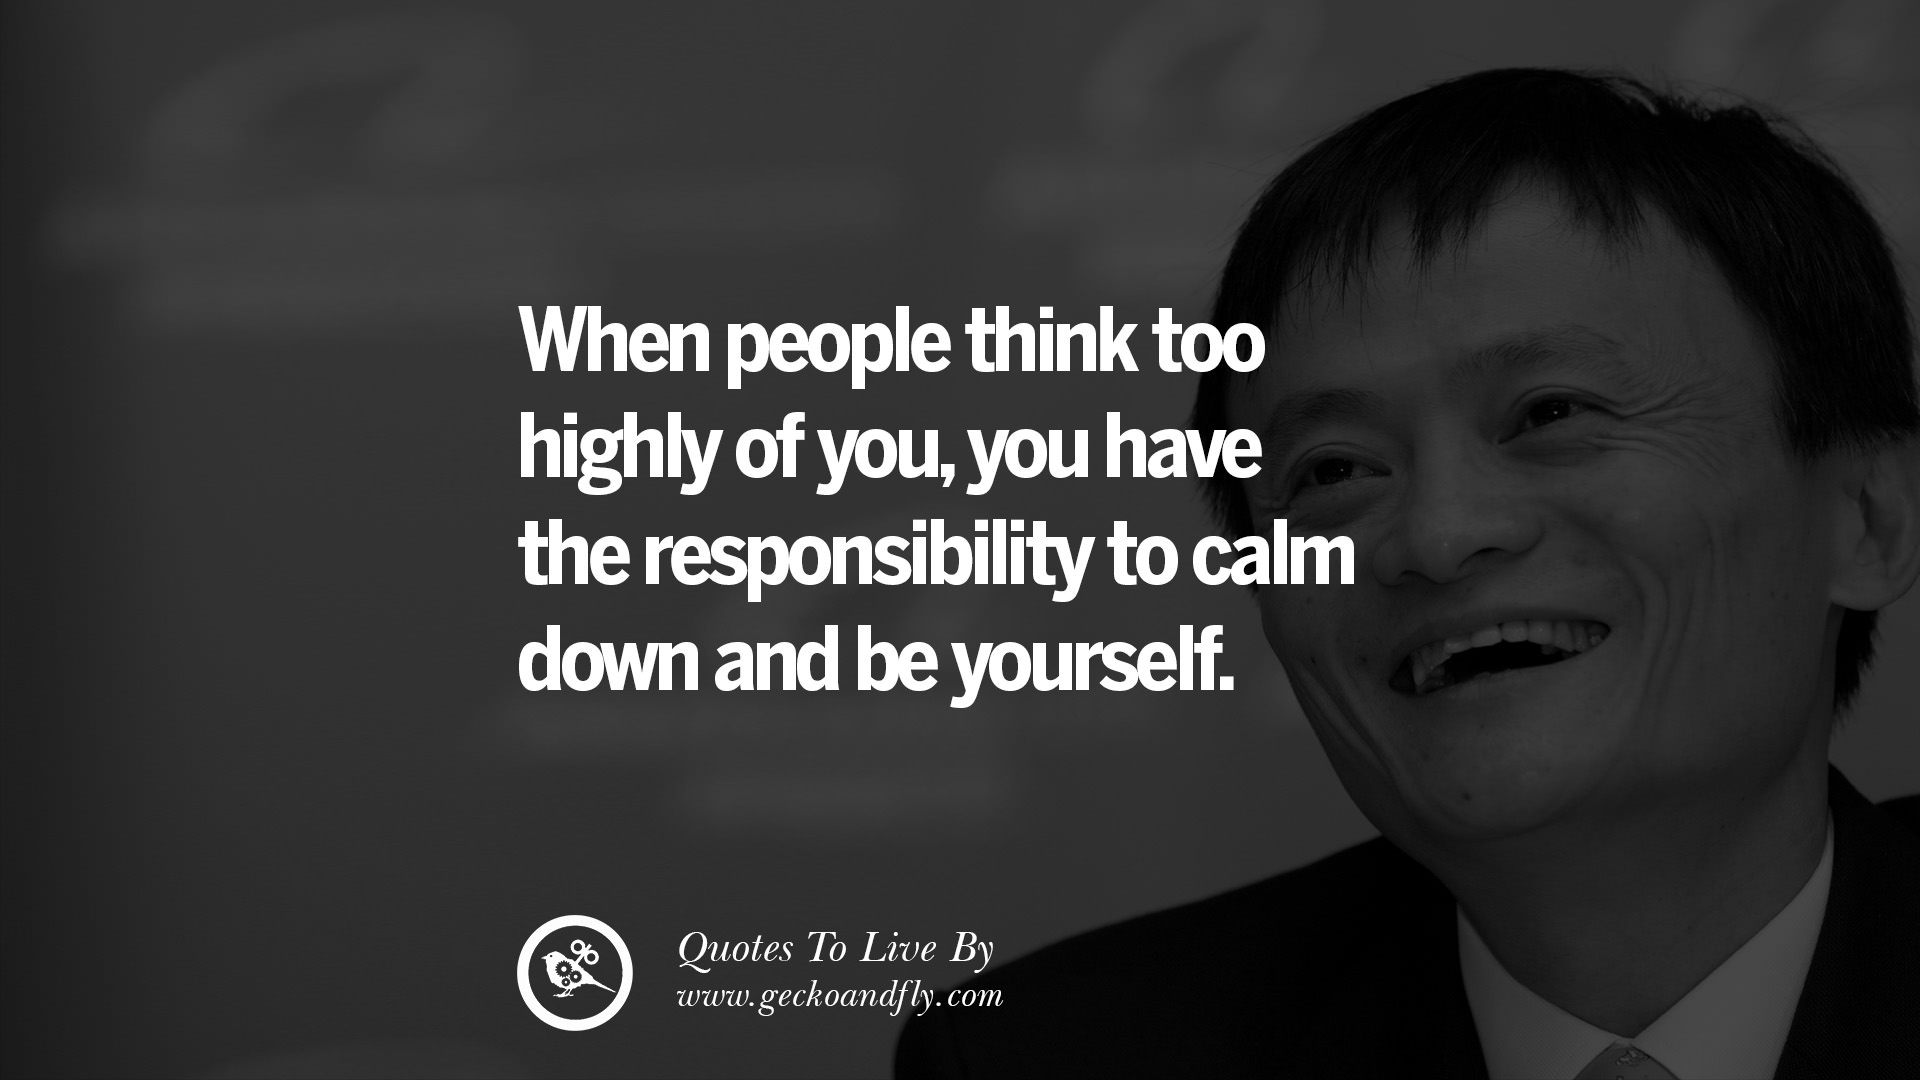 jack ma quotes13